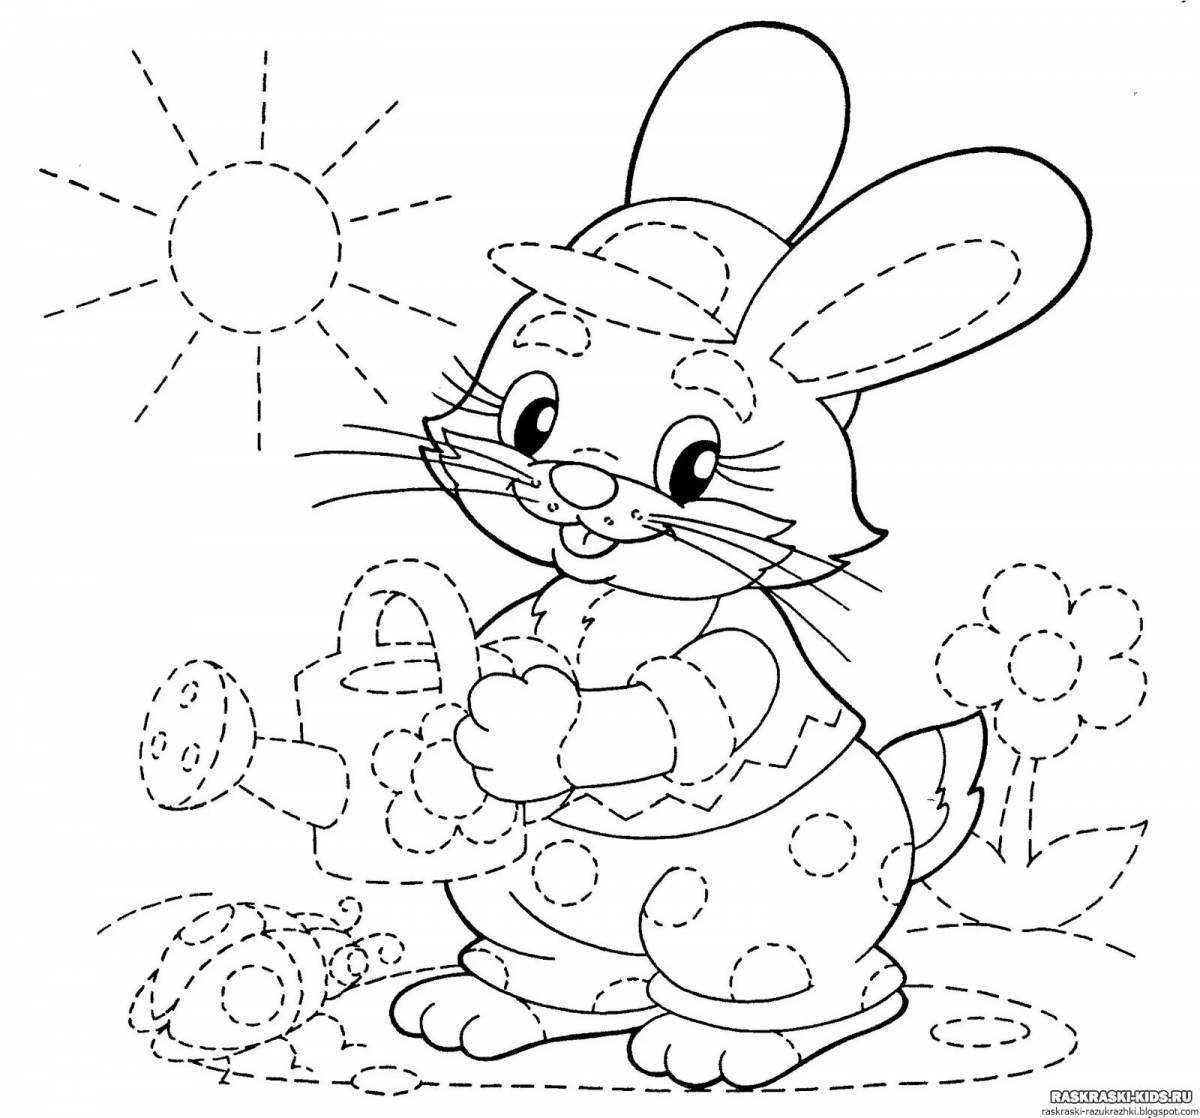 Crazy coloring book for 5 year olds in kindergarten